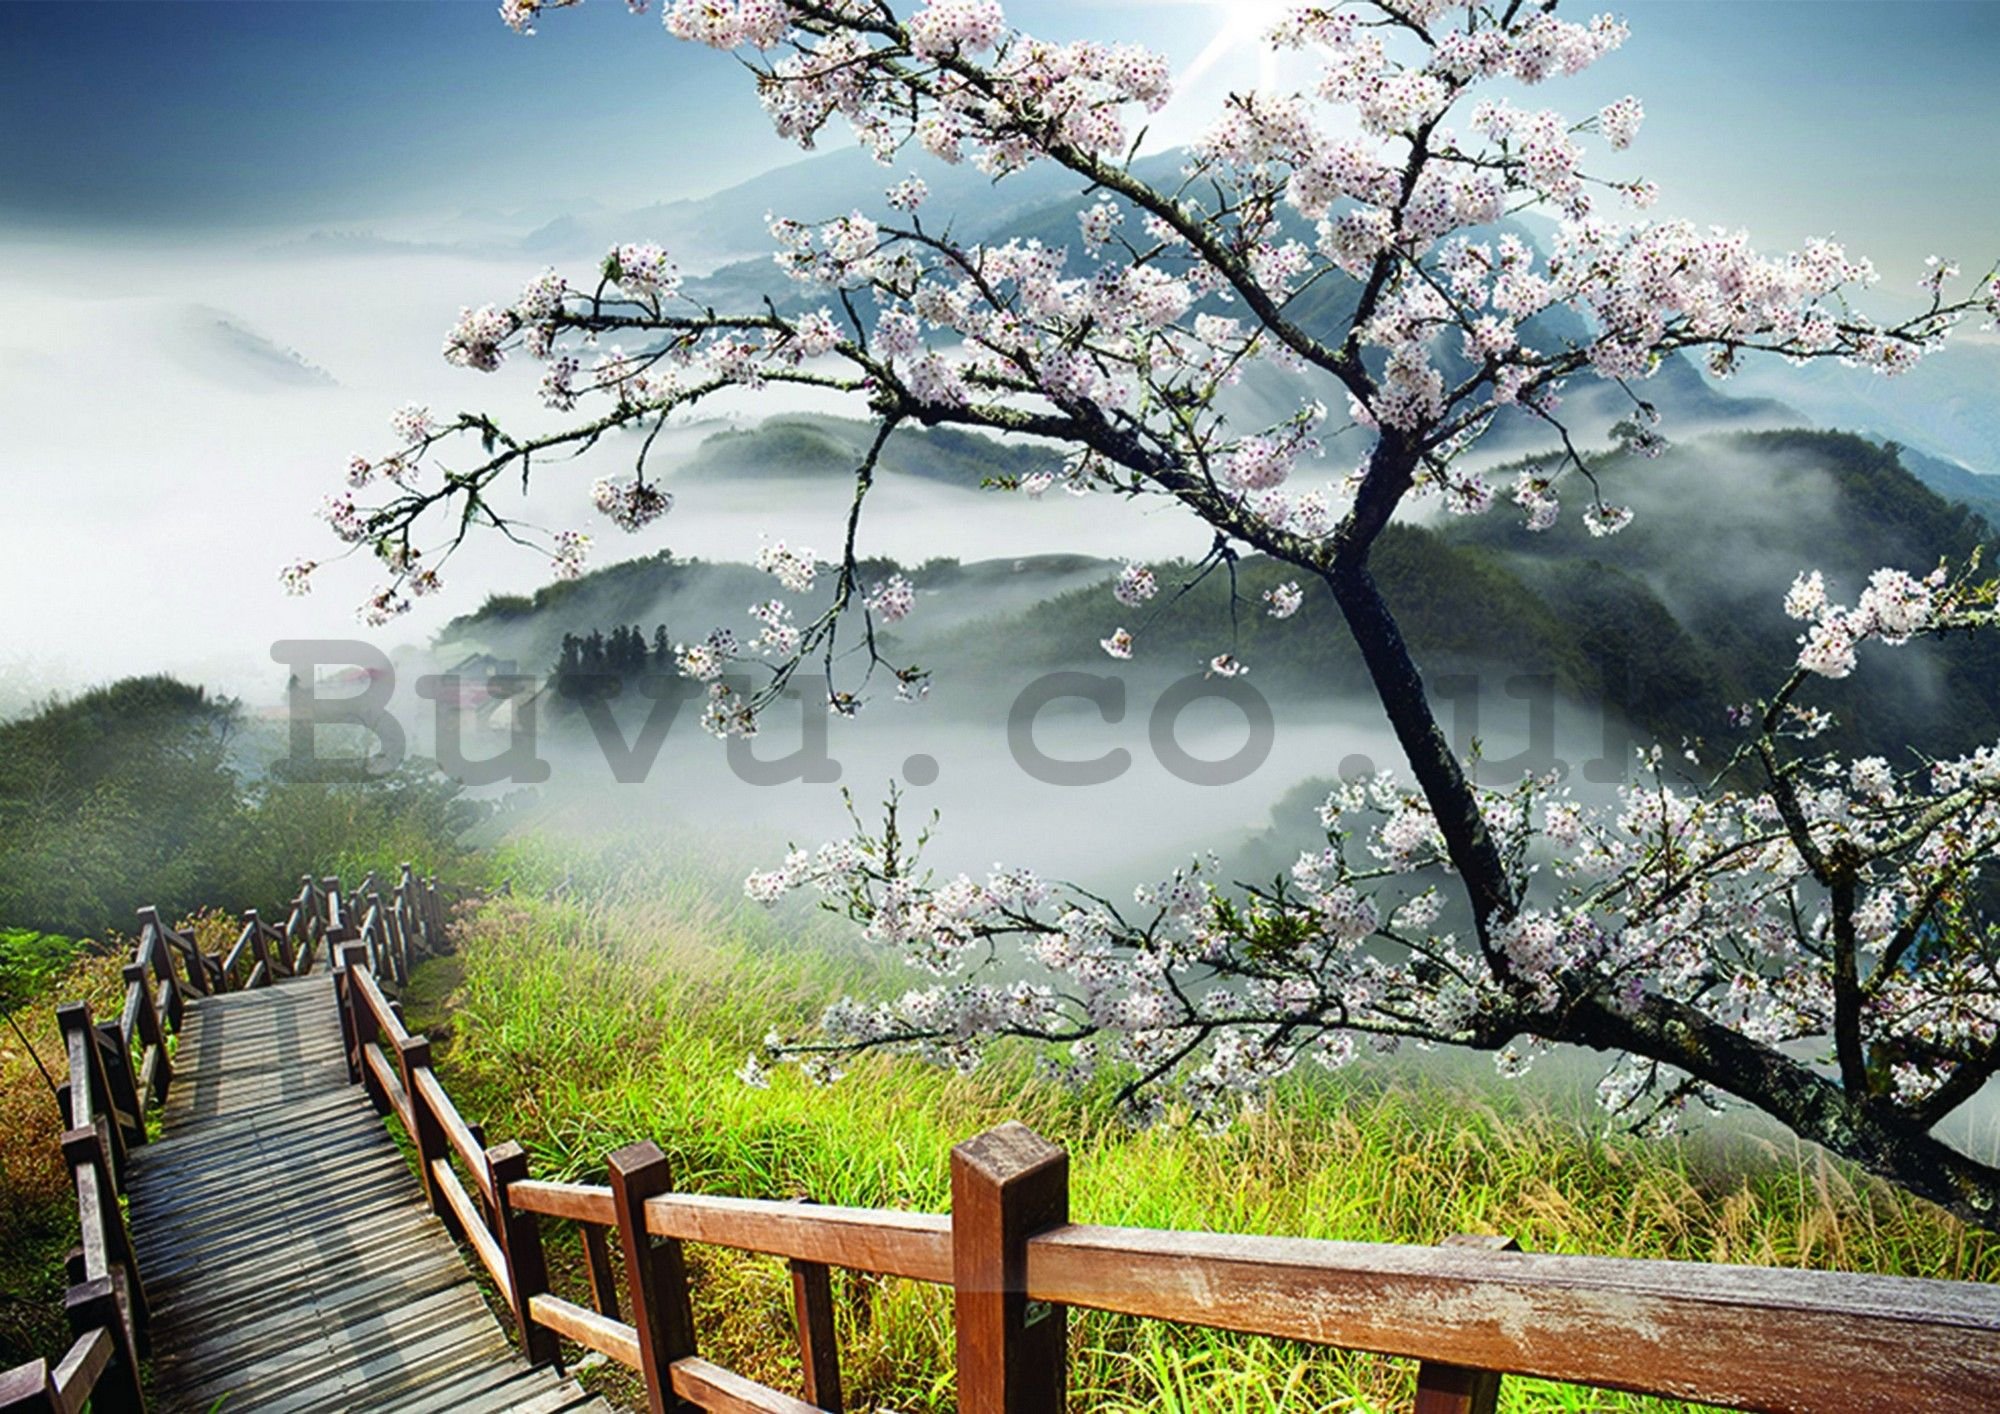 Wall mural vlies: Cherry tree above the stairs - 184x254 cm